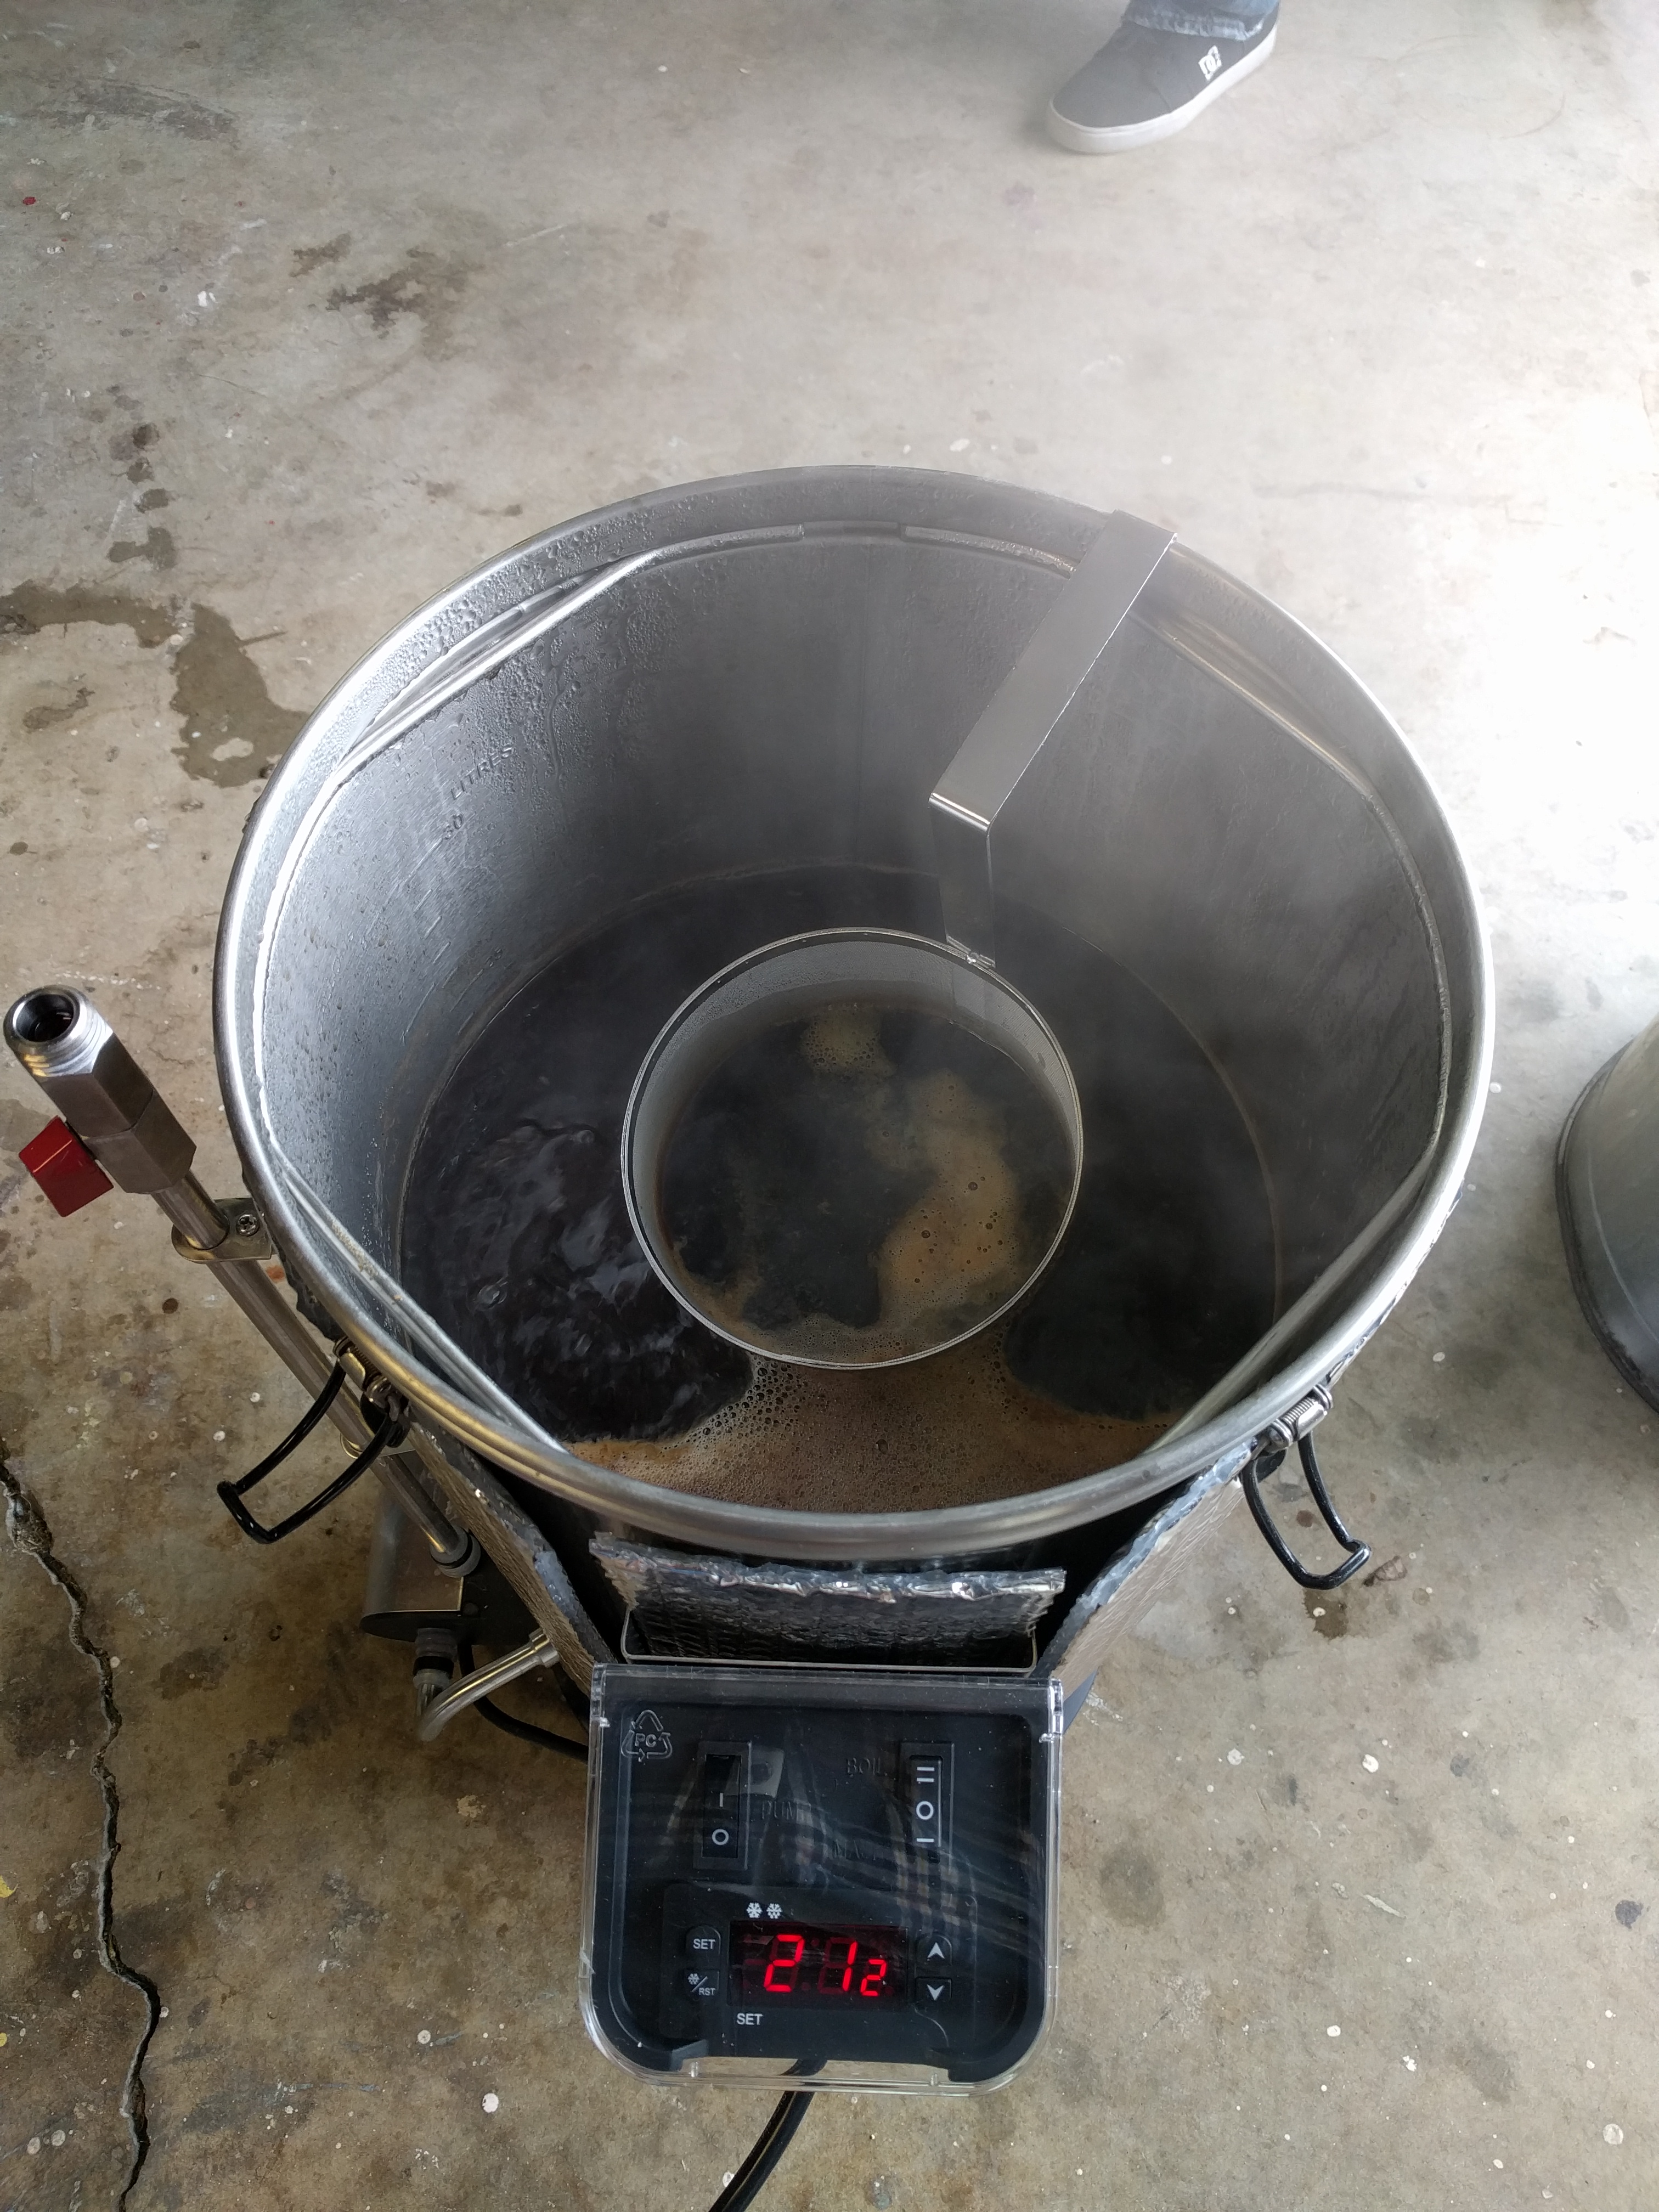 Breaking in the Grainfather